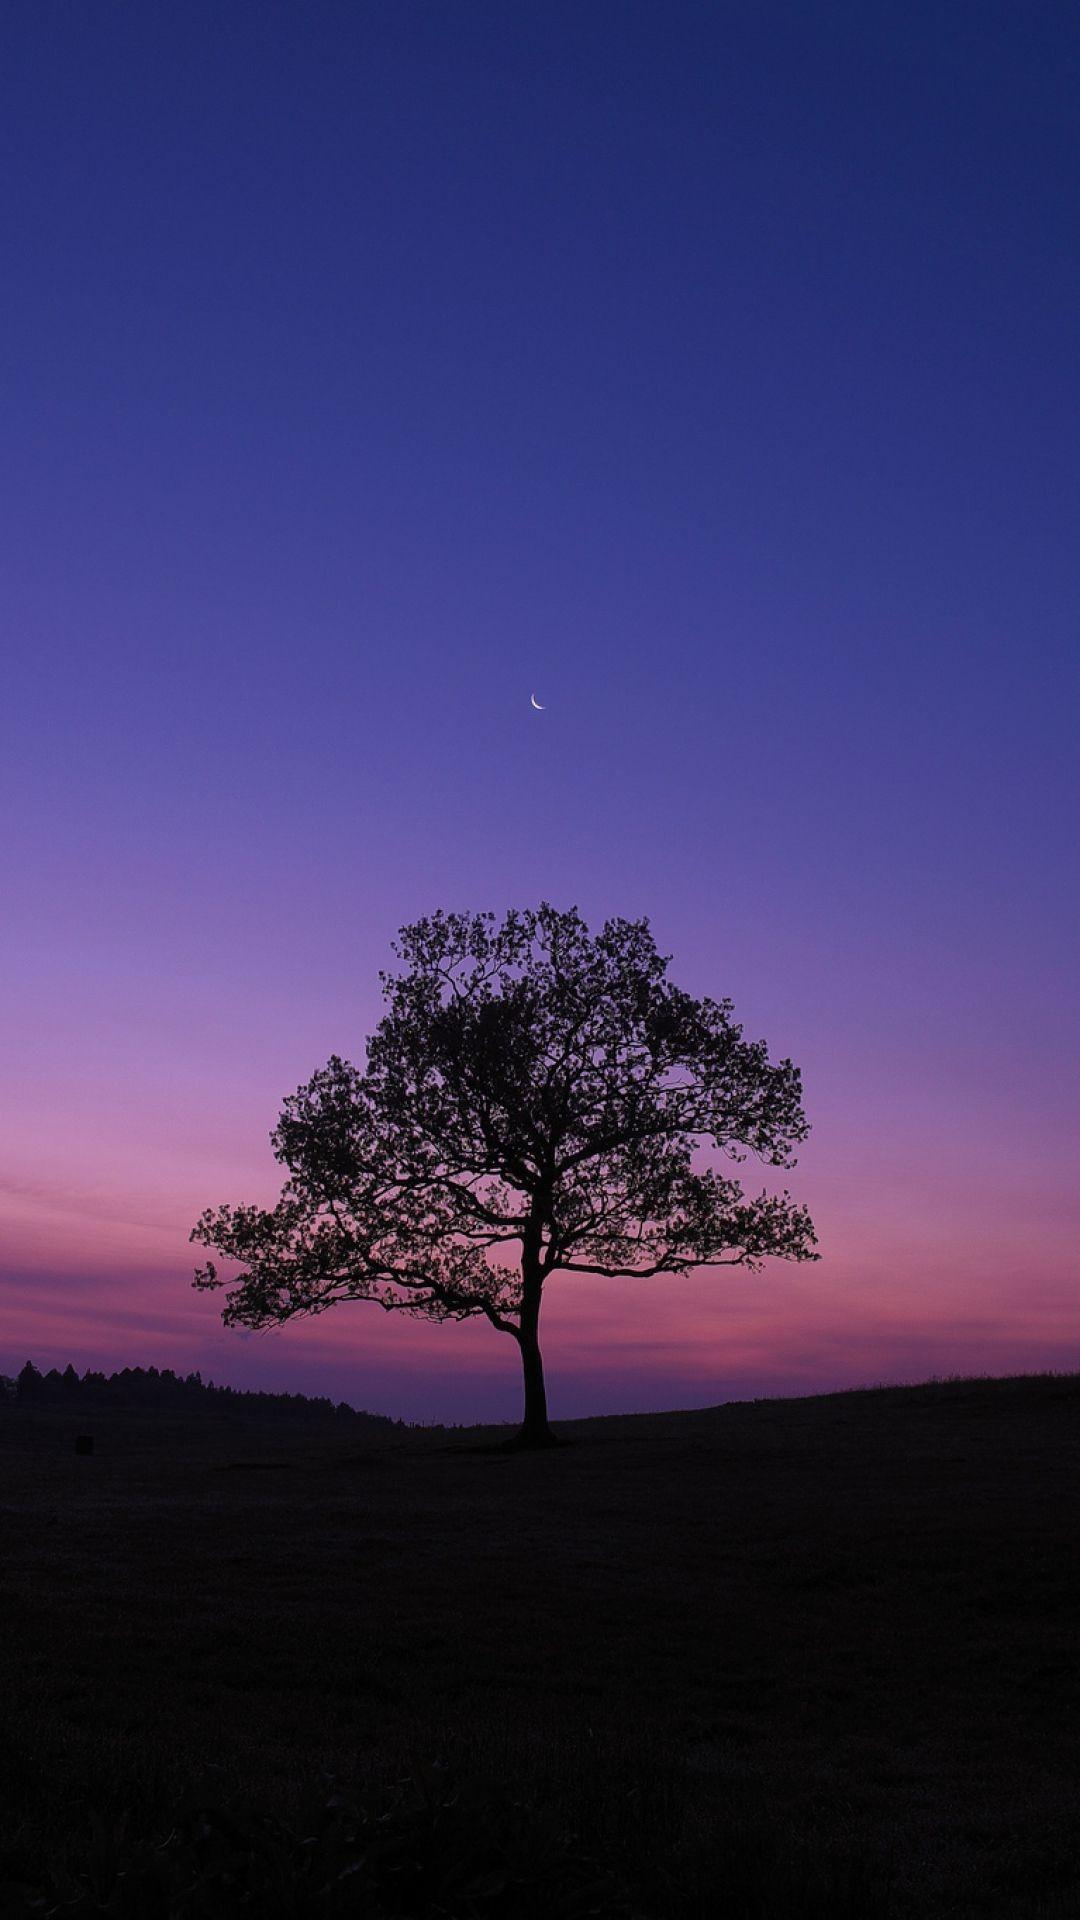 Lonely tree on a lonely night, sky, lonely. Phone Wallpaper